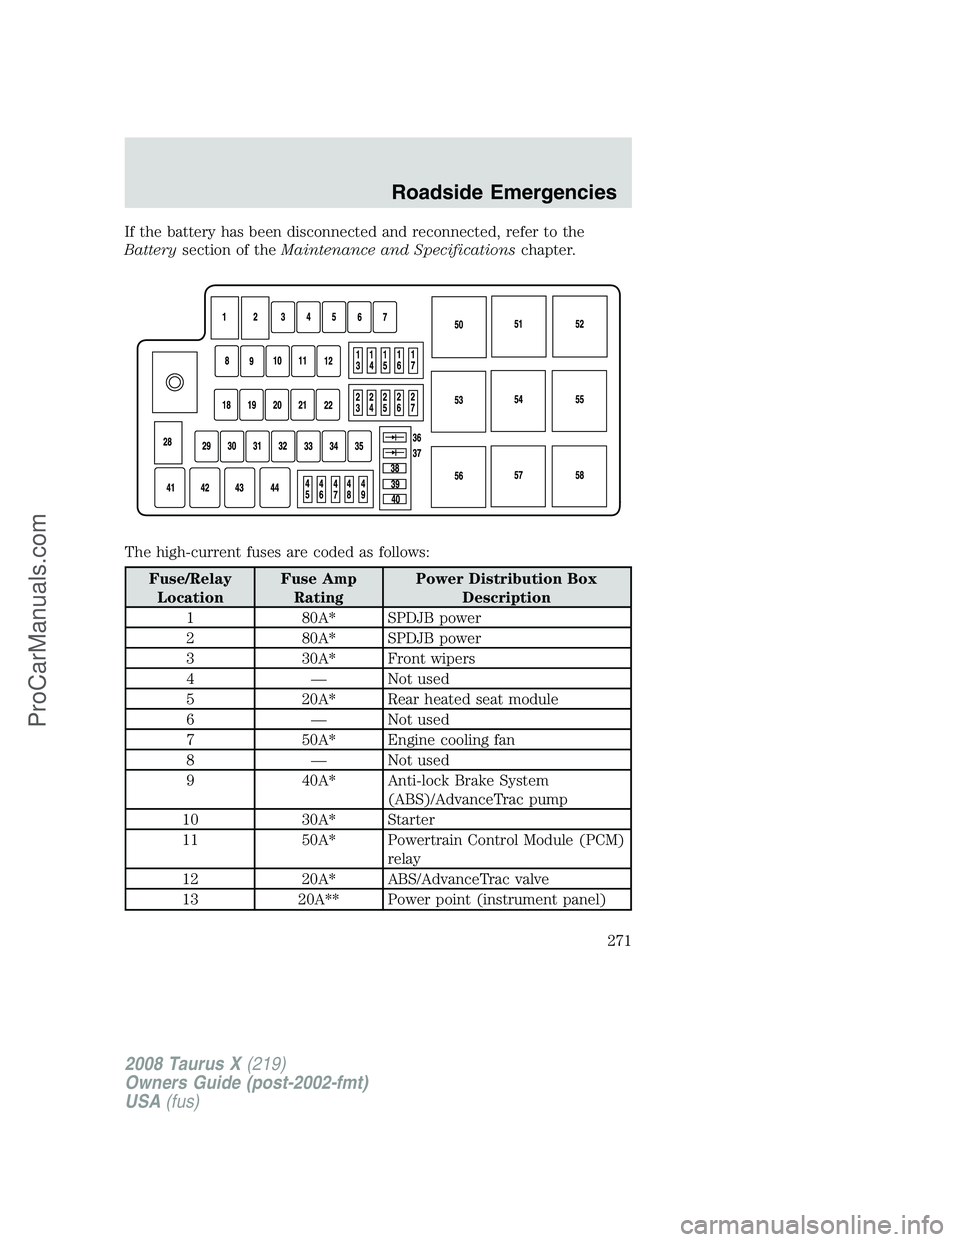 FORD FREESTYLE 2008  Owners Manual If the battery has been disconnected and reconnected, refer to the
Batterysection of theMaintenance and Specificationschapter.
The high-current fuses are coded as follows:
Fuse/Relay
LocationFuse Amp
